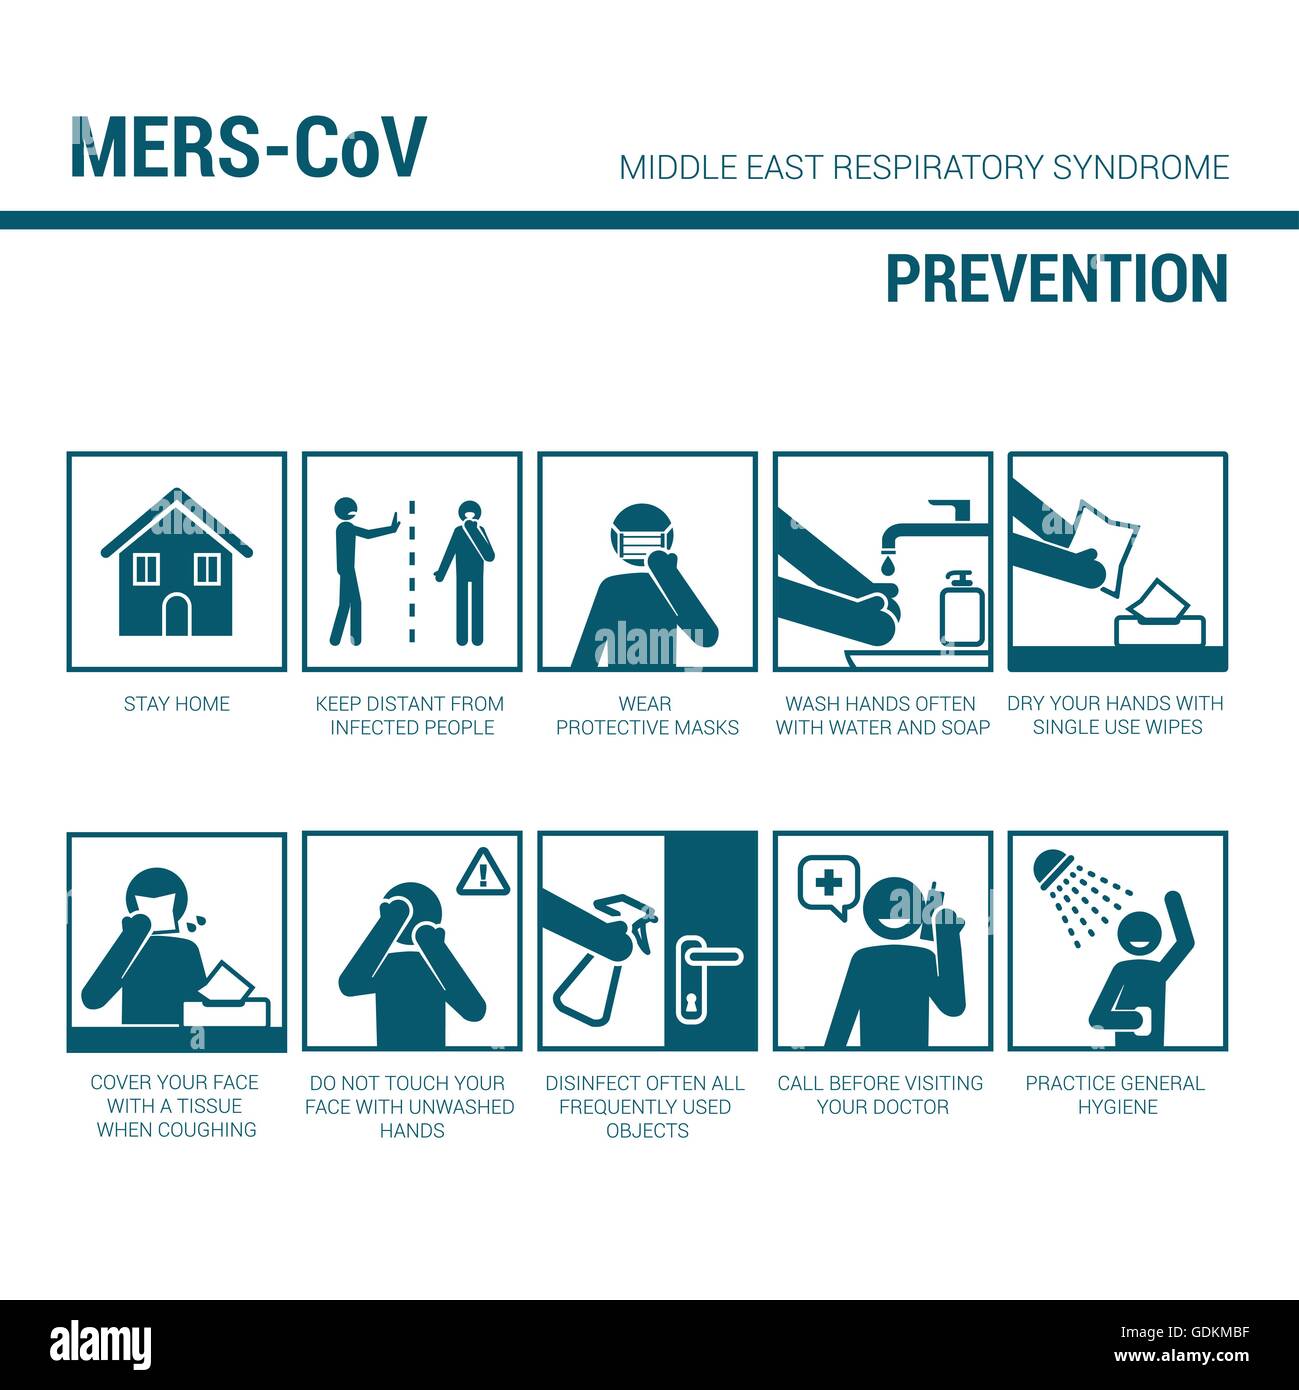 MERS CoV prevention sign, illustrated medical procedures with stick figures to prevent virus spread Stock Vector